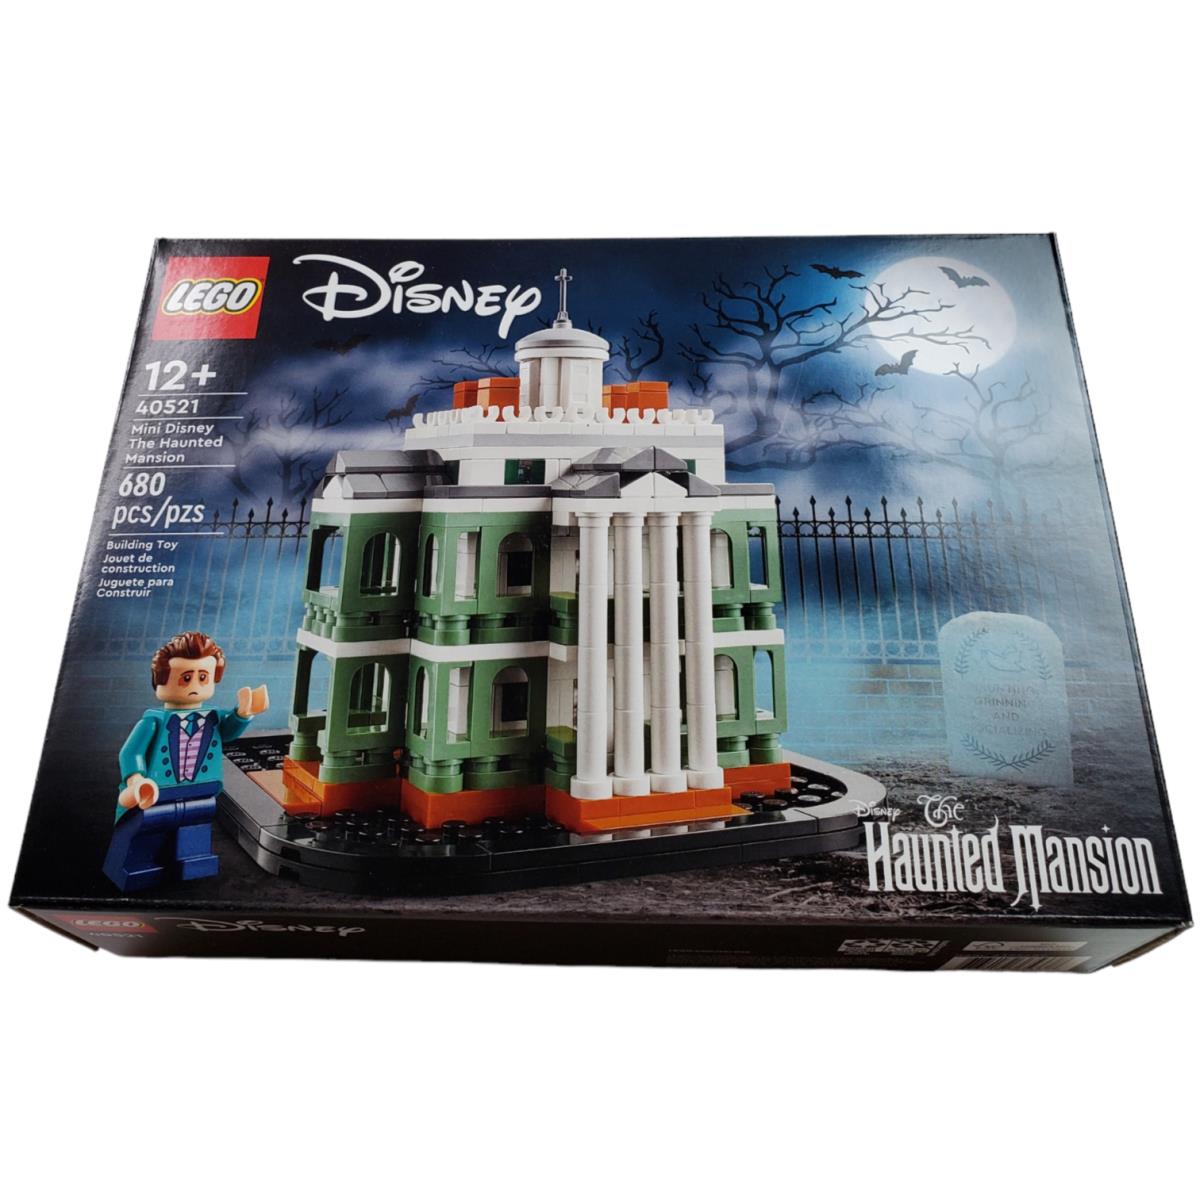 and Lego 40521 Mini Disney The Haunted Mansion 680 Pieces